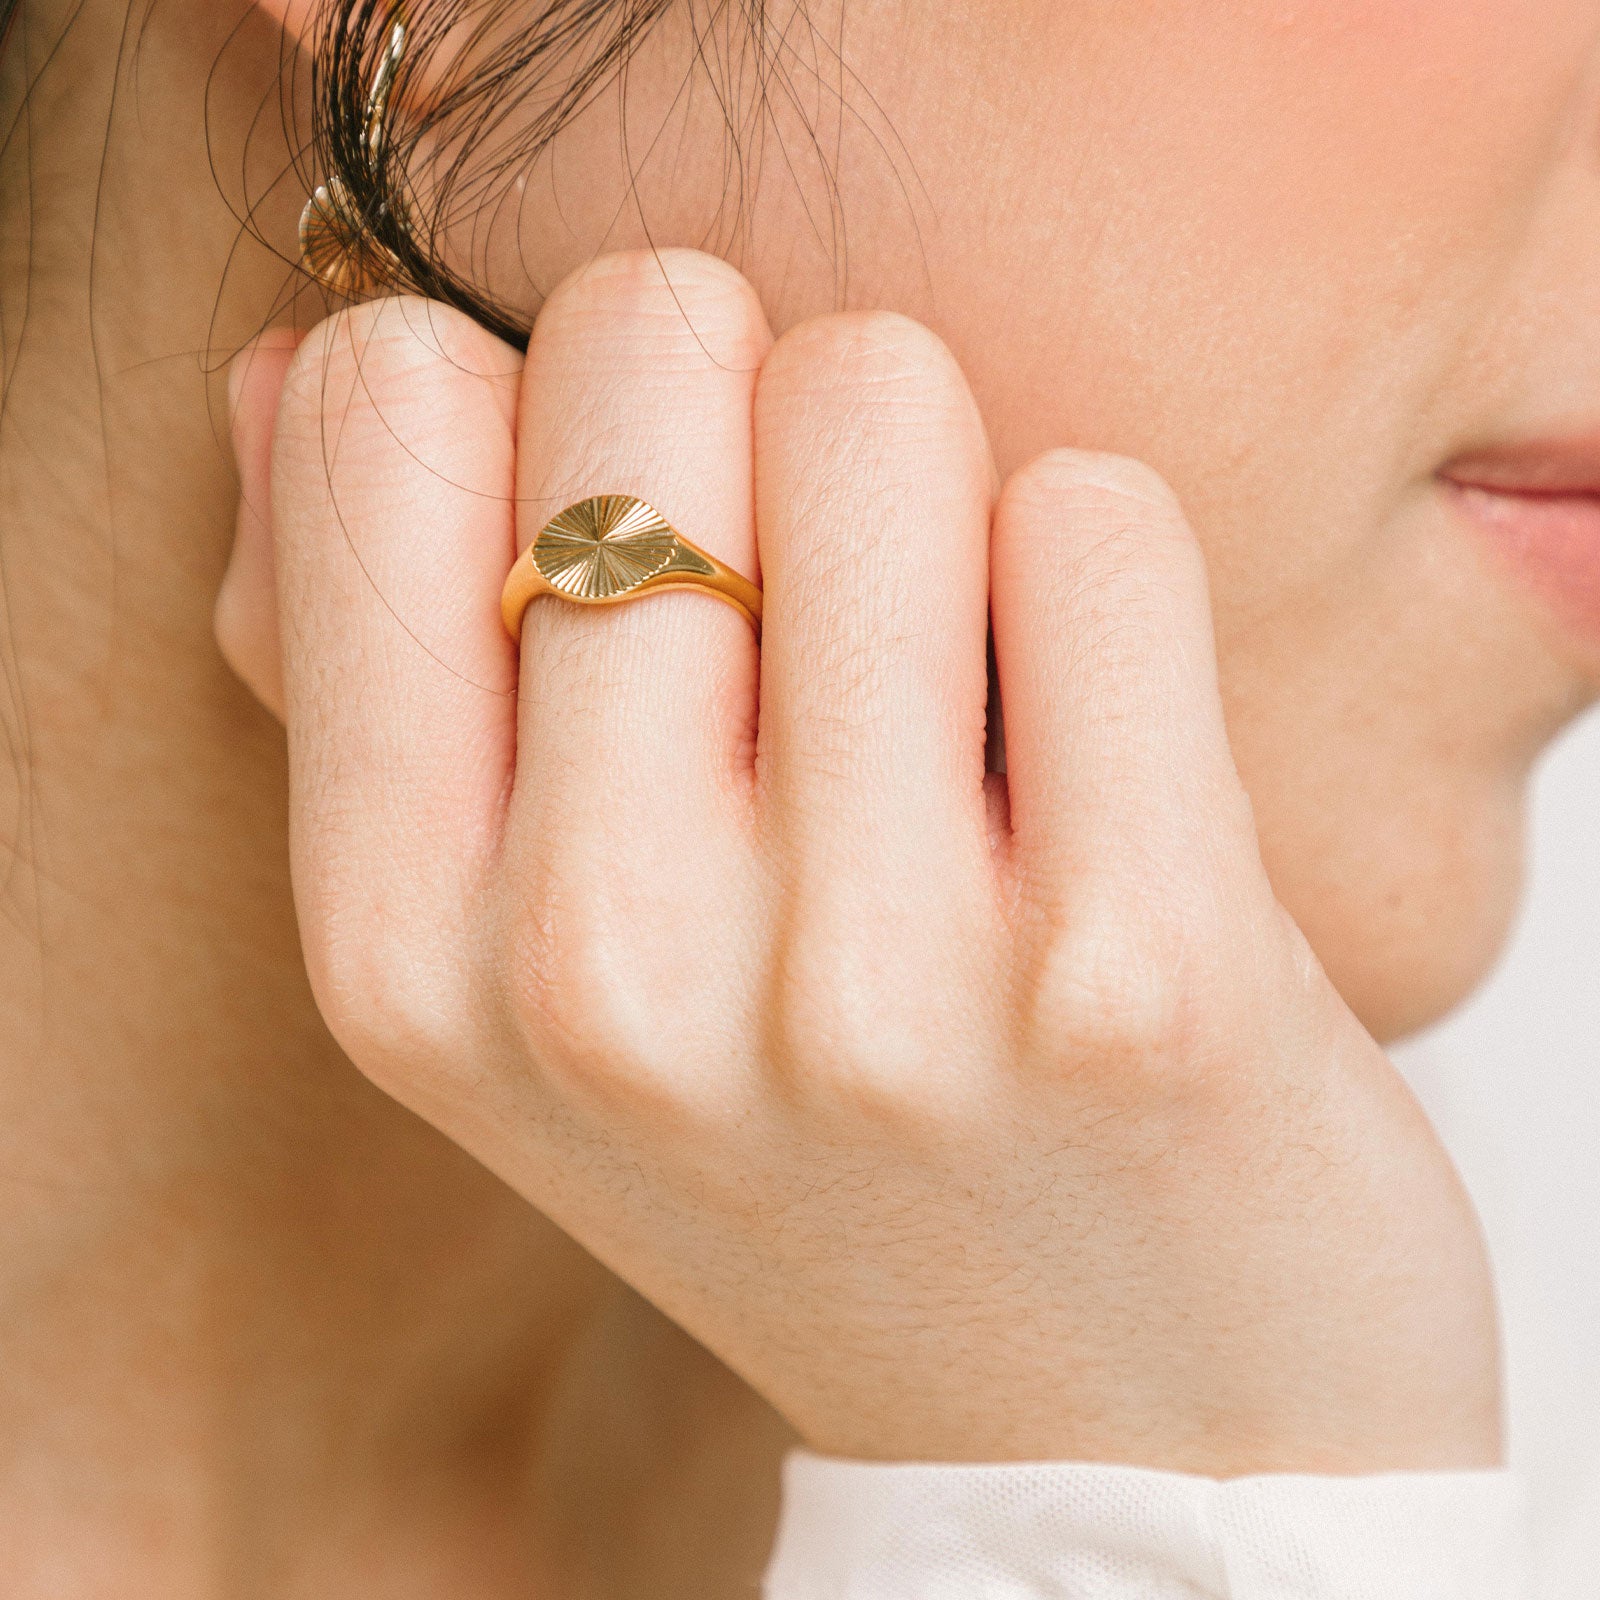 A model wearing the Sunbeam Ring is crafted out of 18K Gold Plated Stainless Steel, providing a non-tarnishing and water-resistant material. Please note, this ring is sold as a single item.